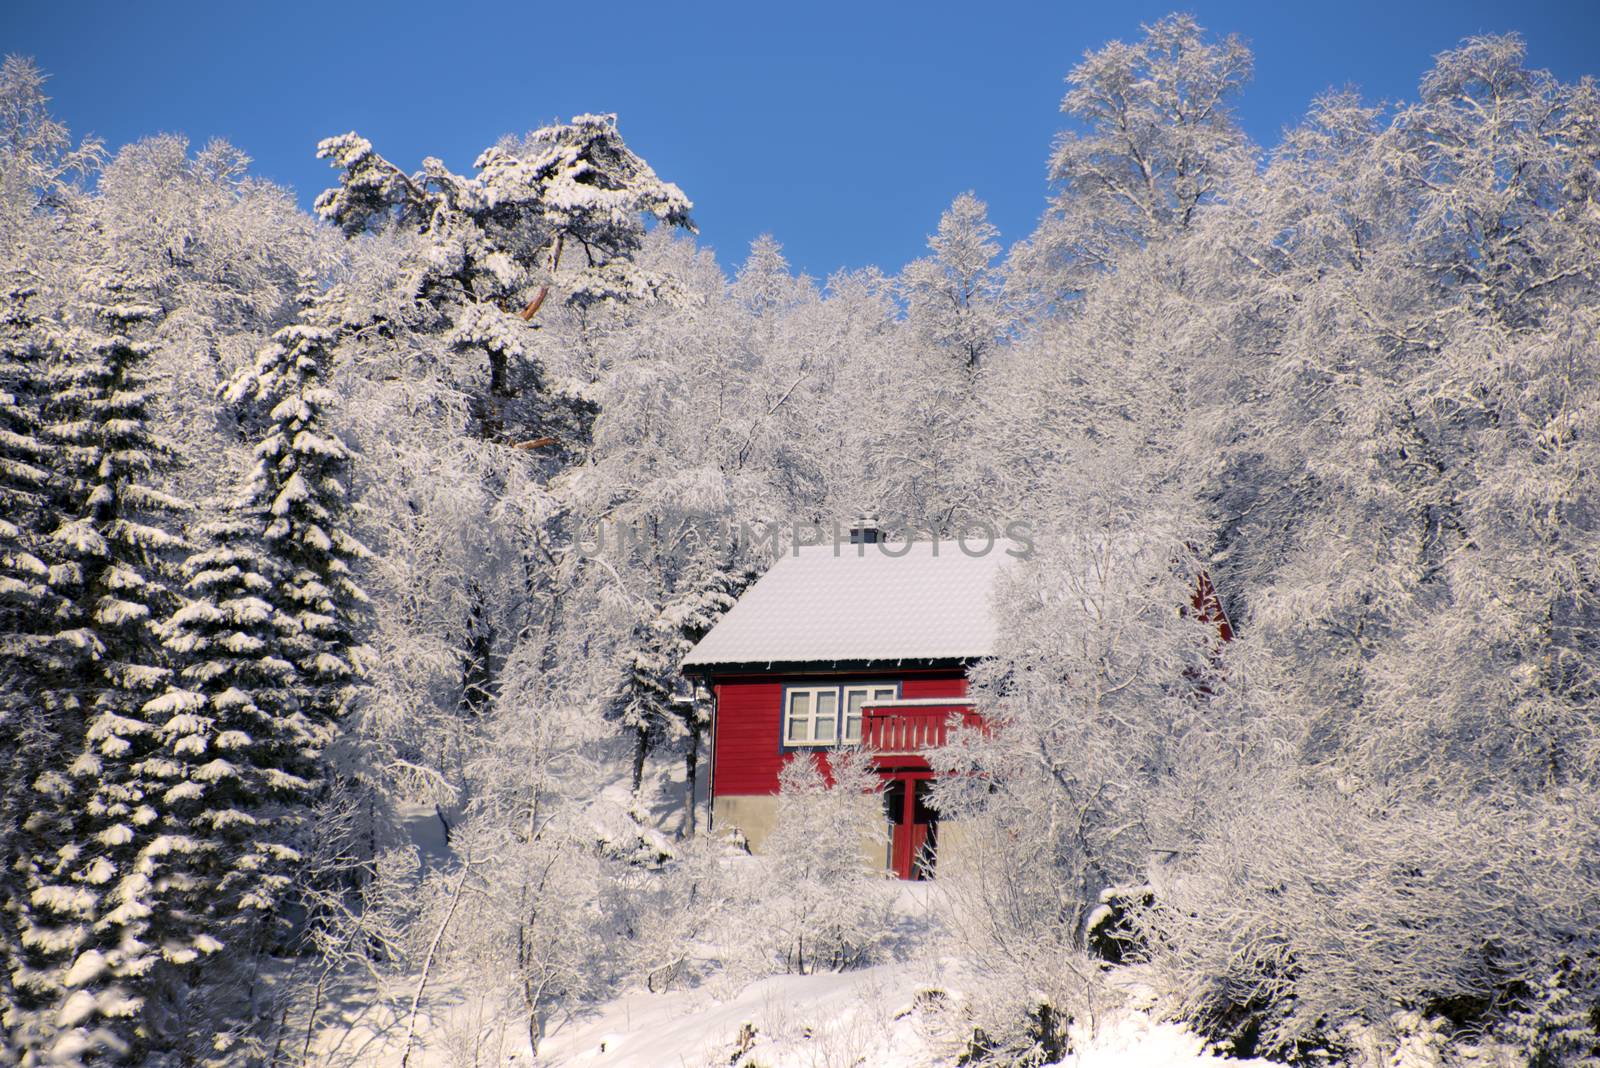 A small red cabin in a winter forest with snow, blue sky and sunshine